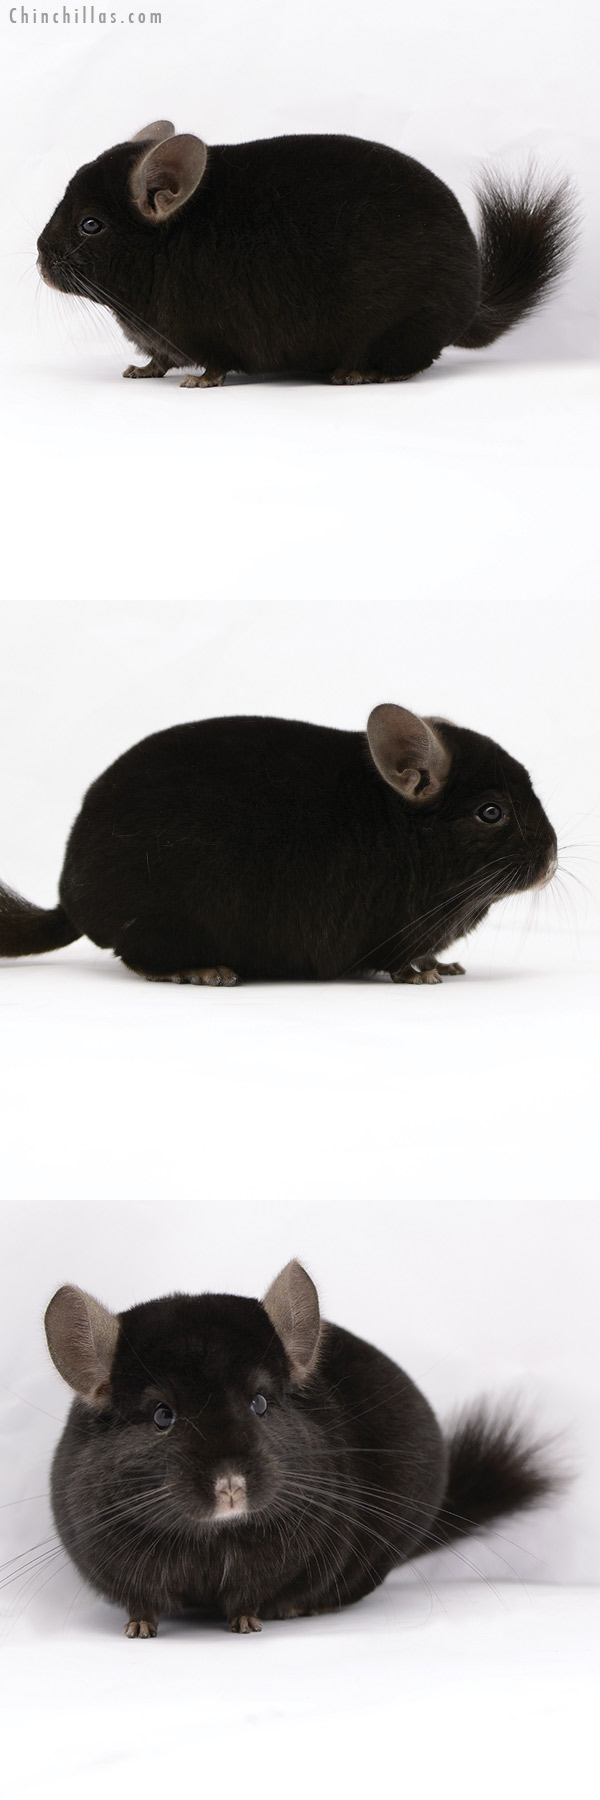 Chinchilla or related item offered for sale or export on Chinchillas.com - 20209 Herd Improvement Quality Ebony Male Chinchilla